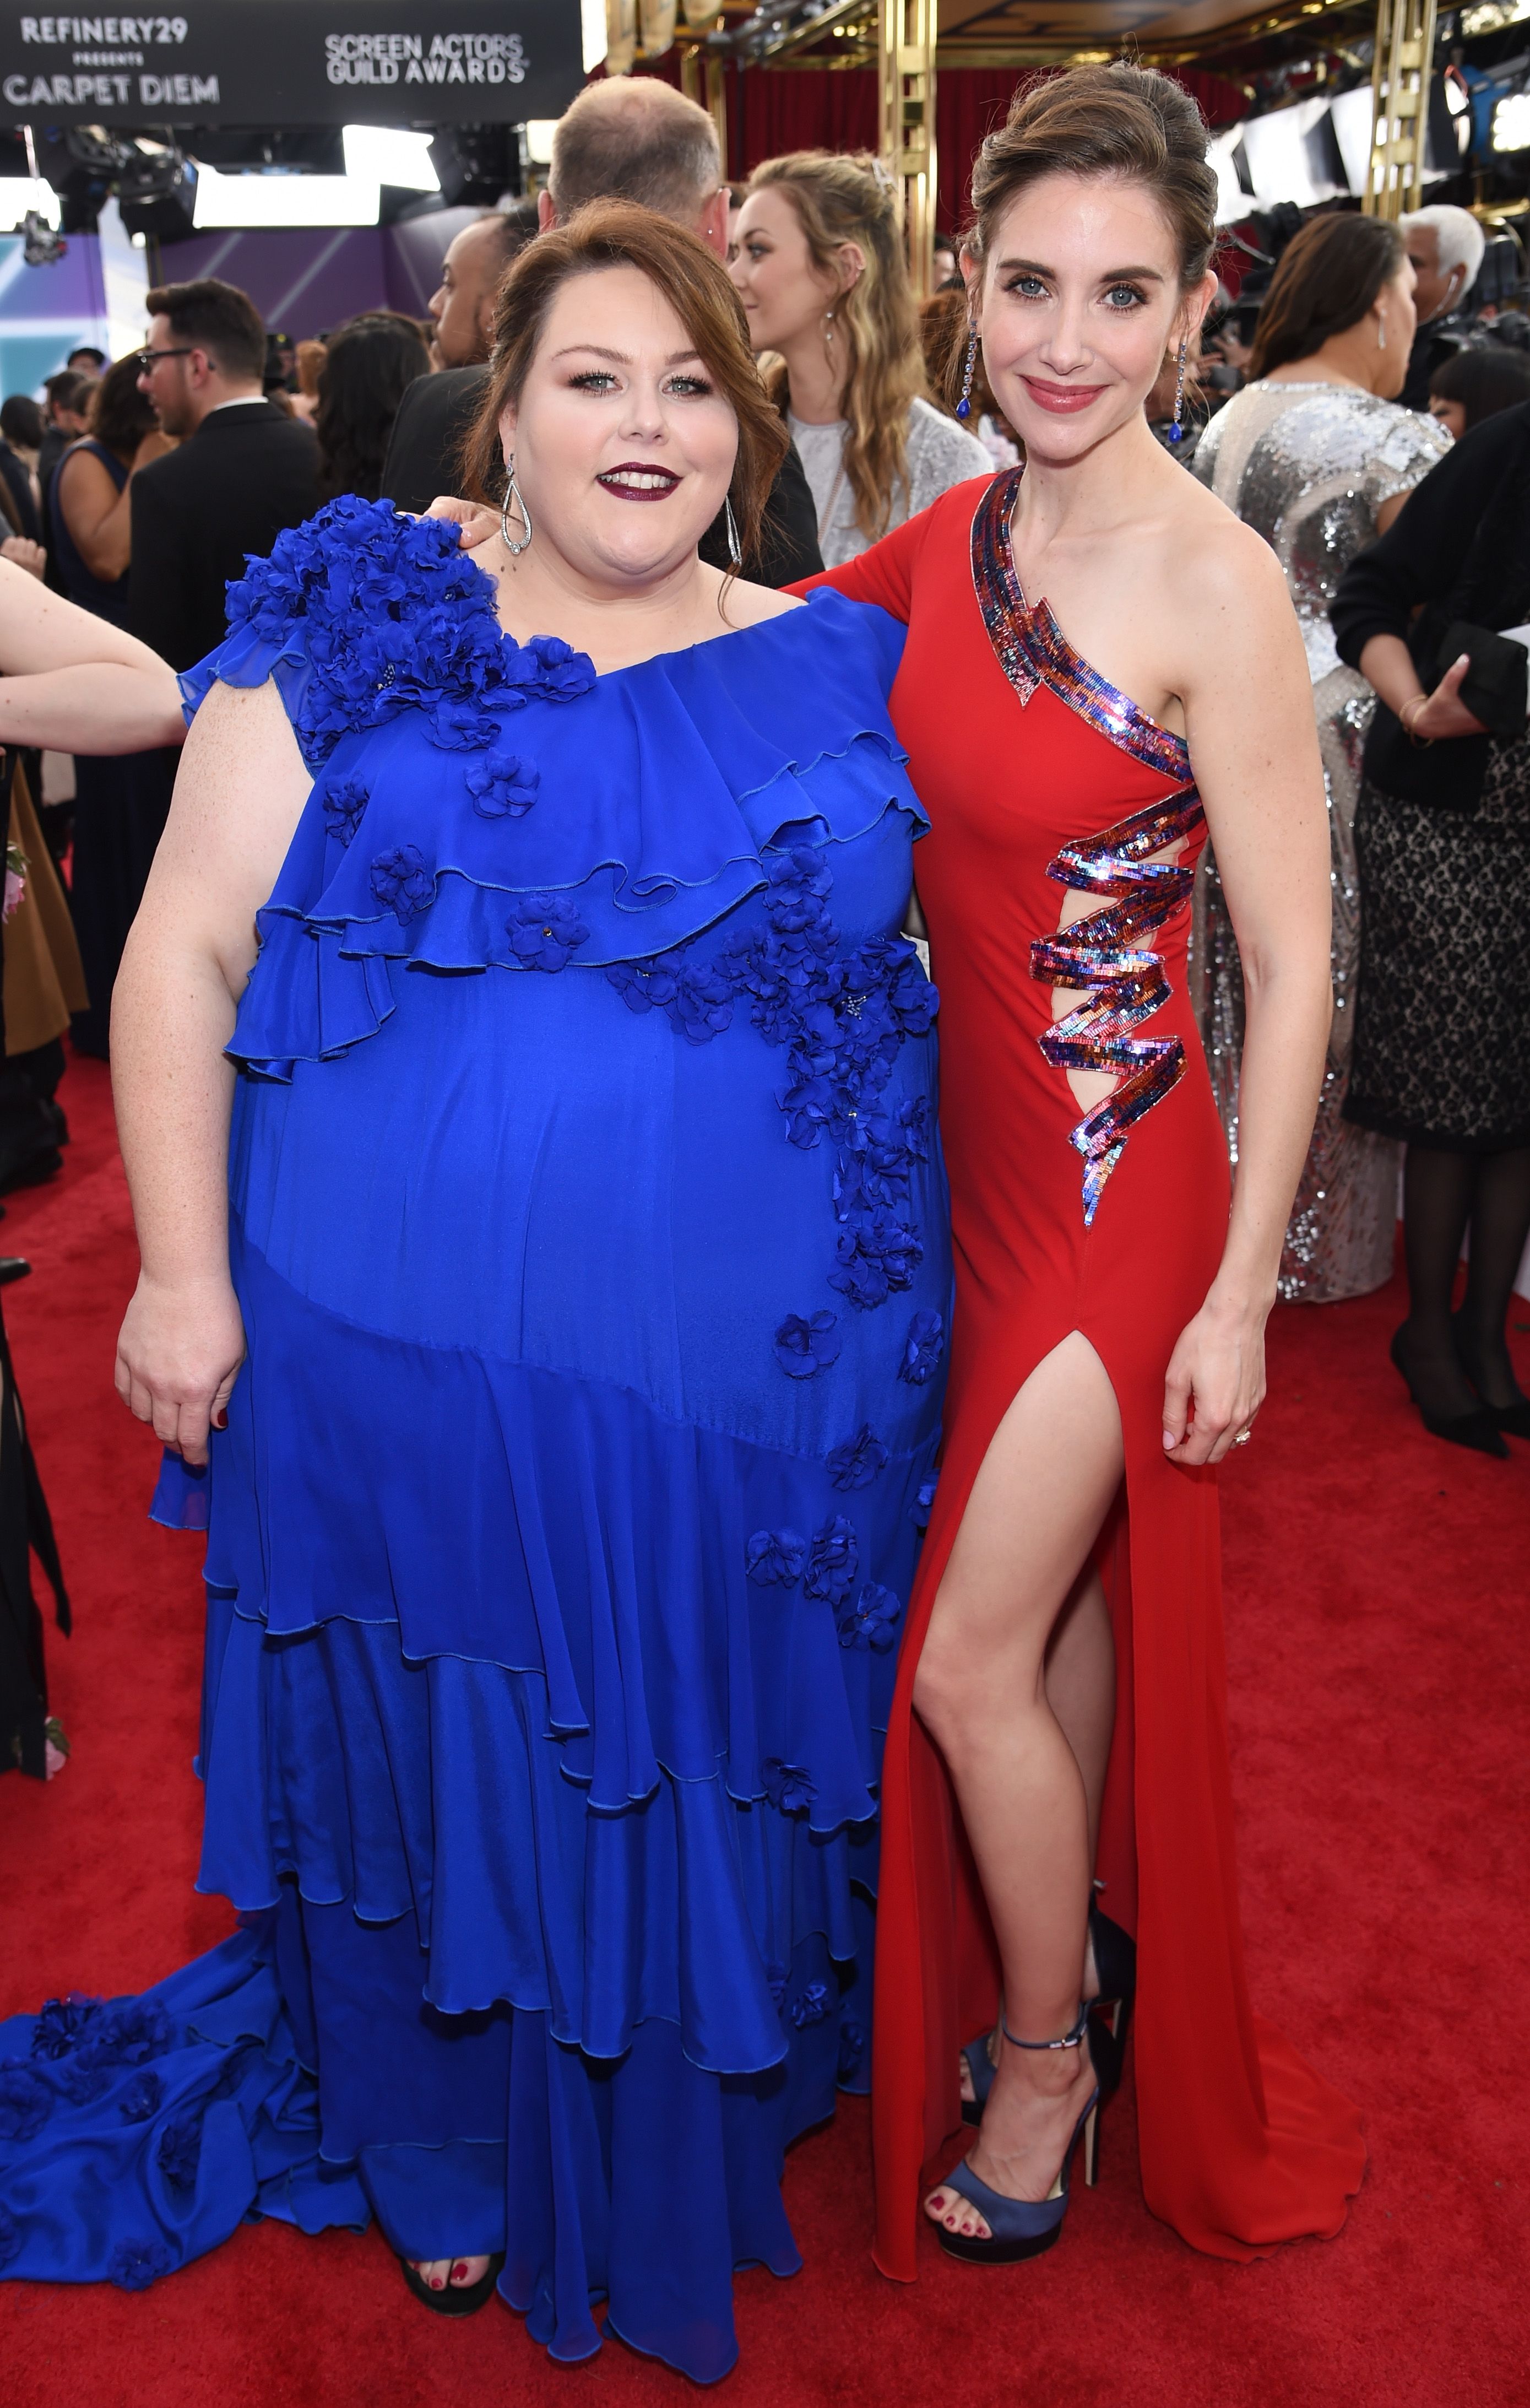 Chrissy Metz and Alison Brie